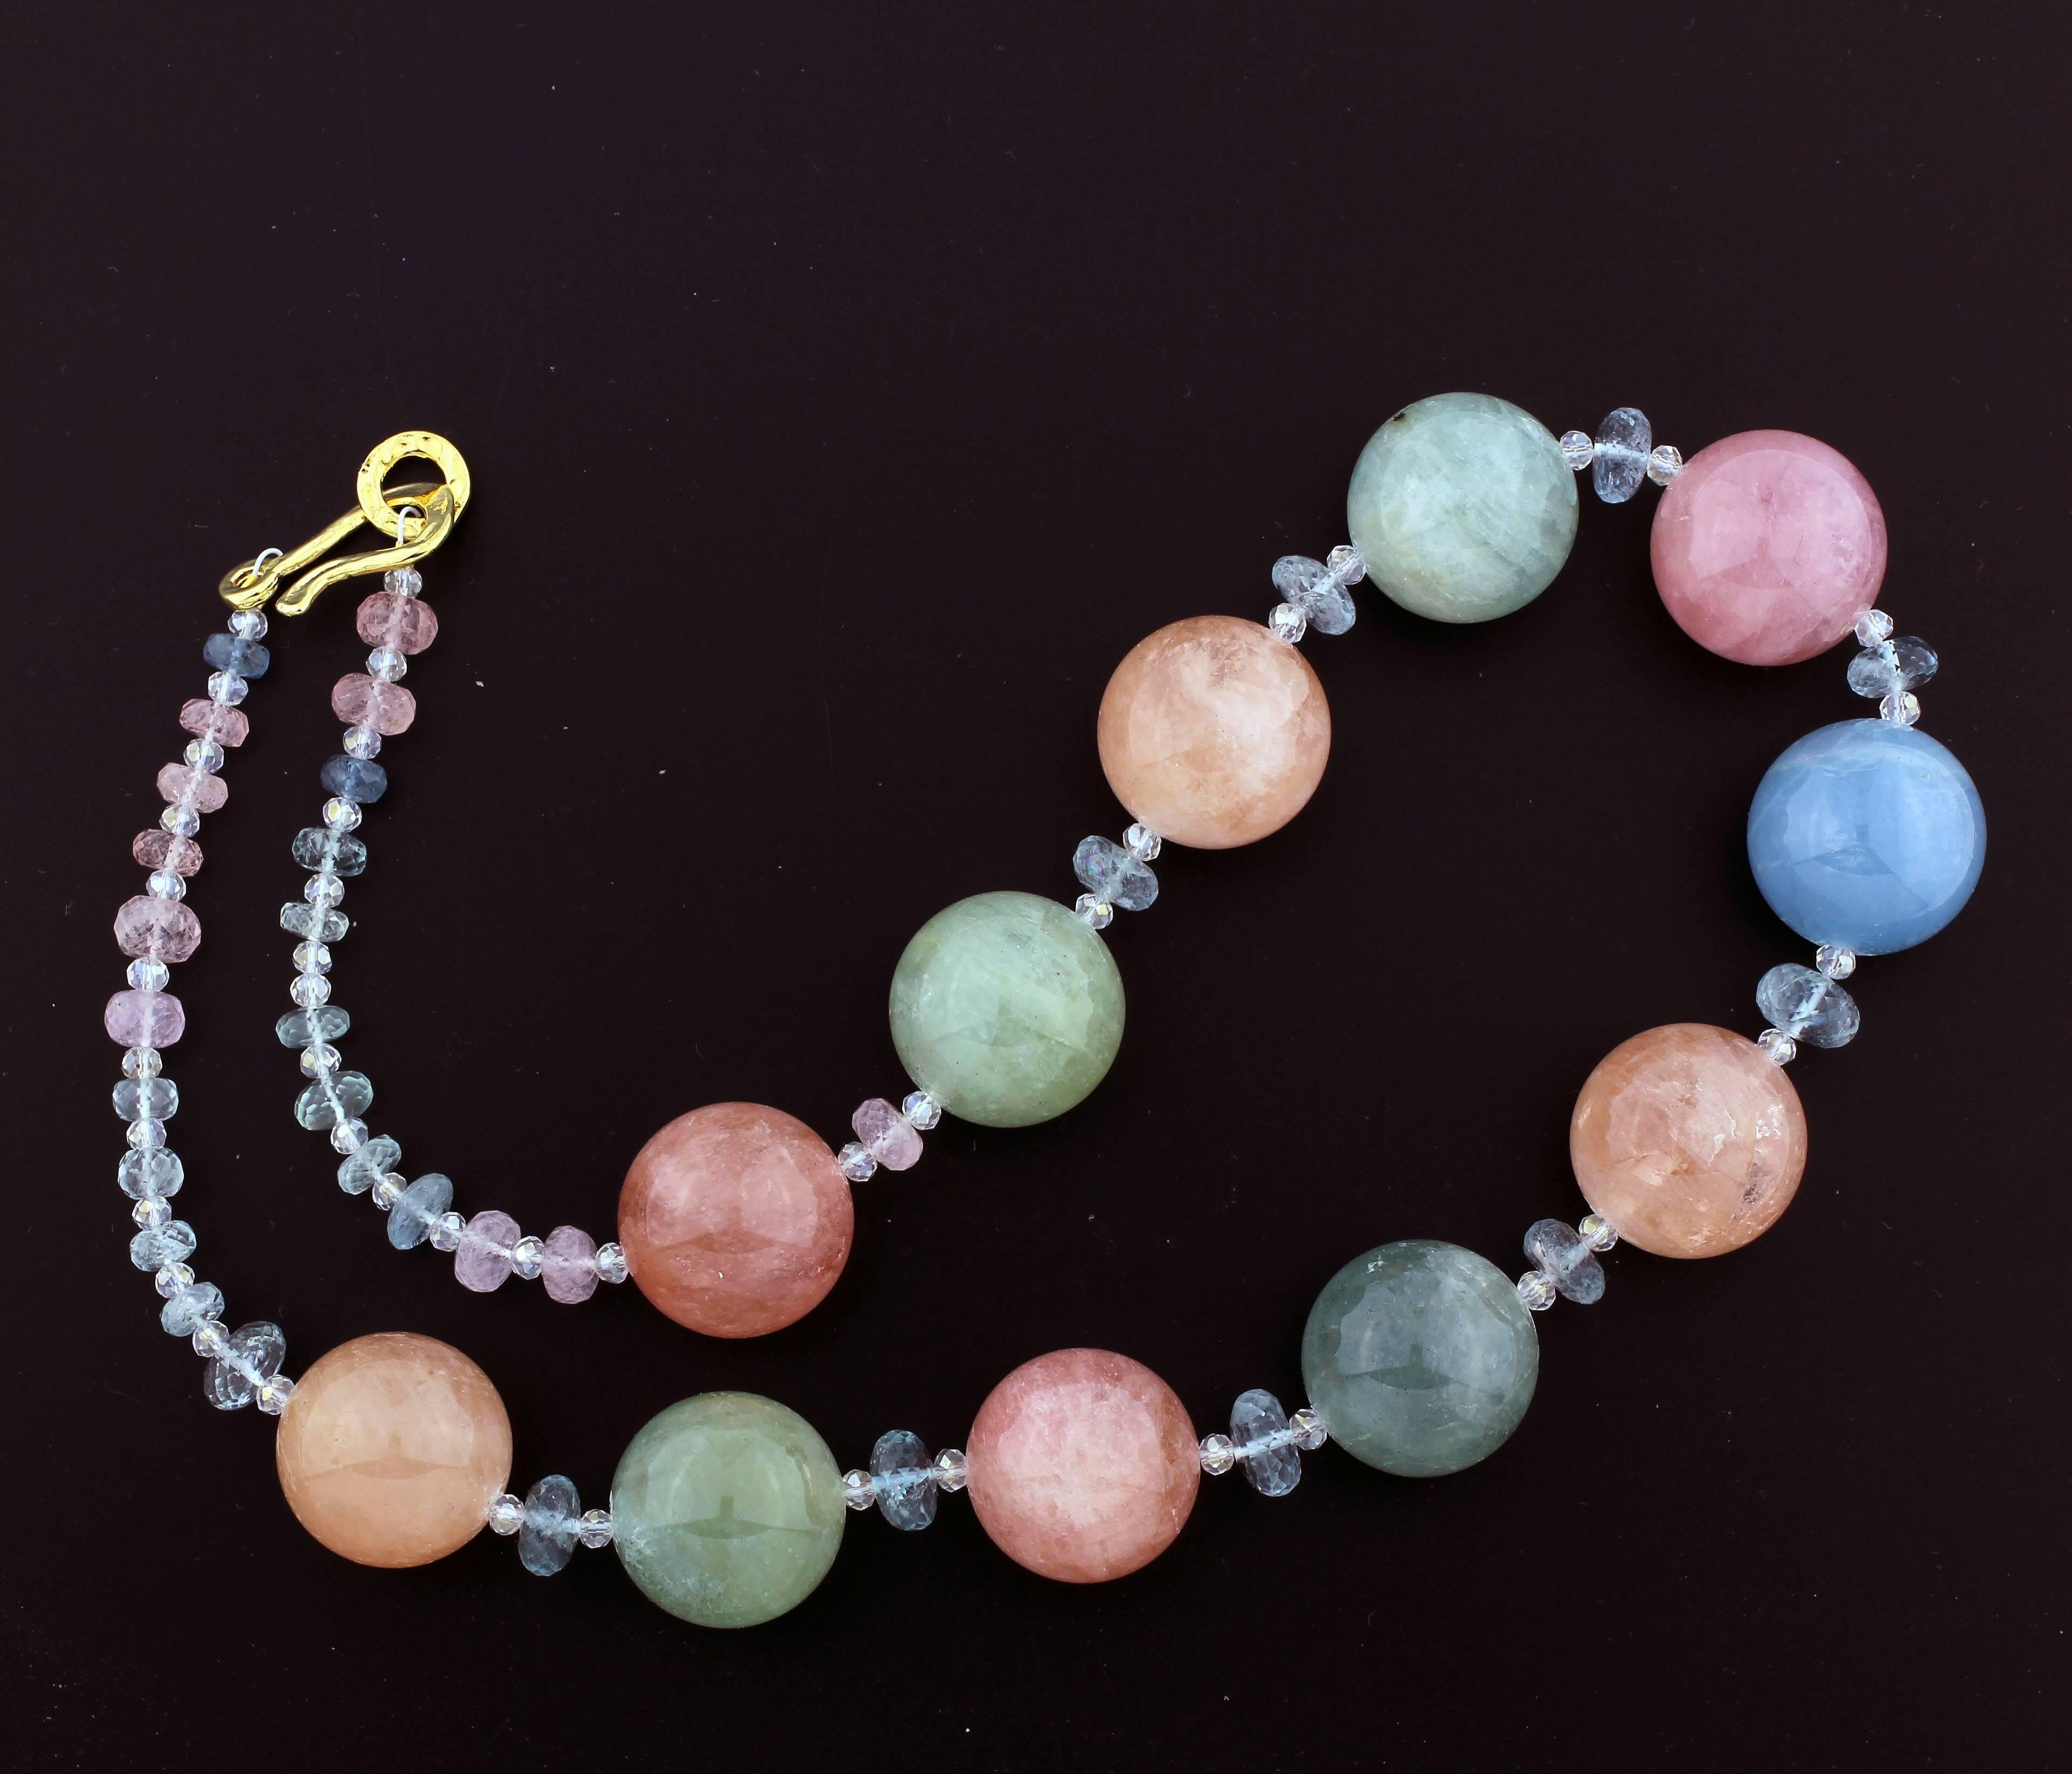 Glowing glistening colors of natural highly polished Aquamarine, Morganite, and Green Beryl hang 20 inches long from a hammered gold plated sterling silver (vermeil) clasp.  This goes gracefully and elegantly from daytime to evening events.